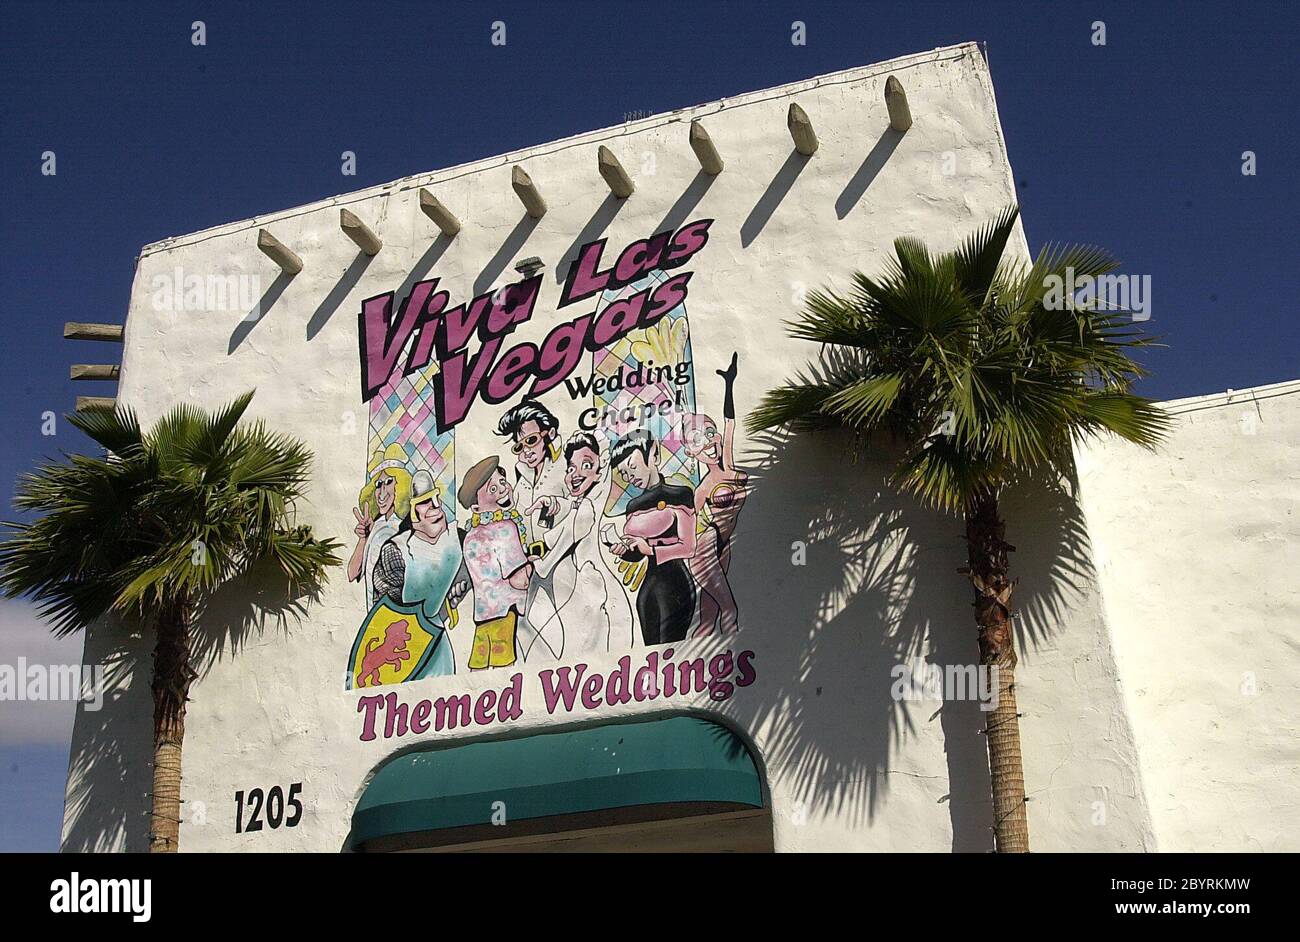 Wedding Chapel Las Vegsa 630 Hotel and most important places in Las Vegas The most beautiful place in Las Vegas Stock Photo